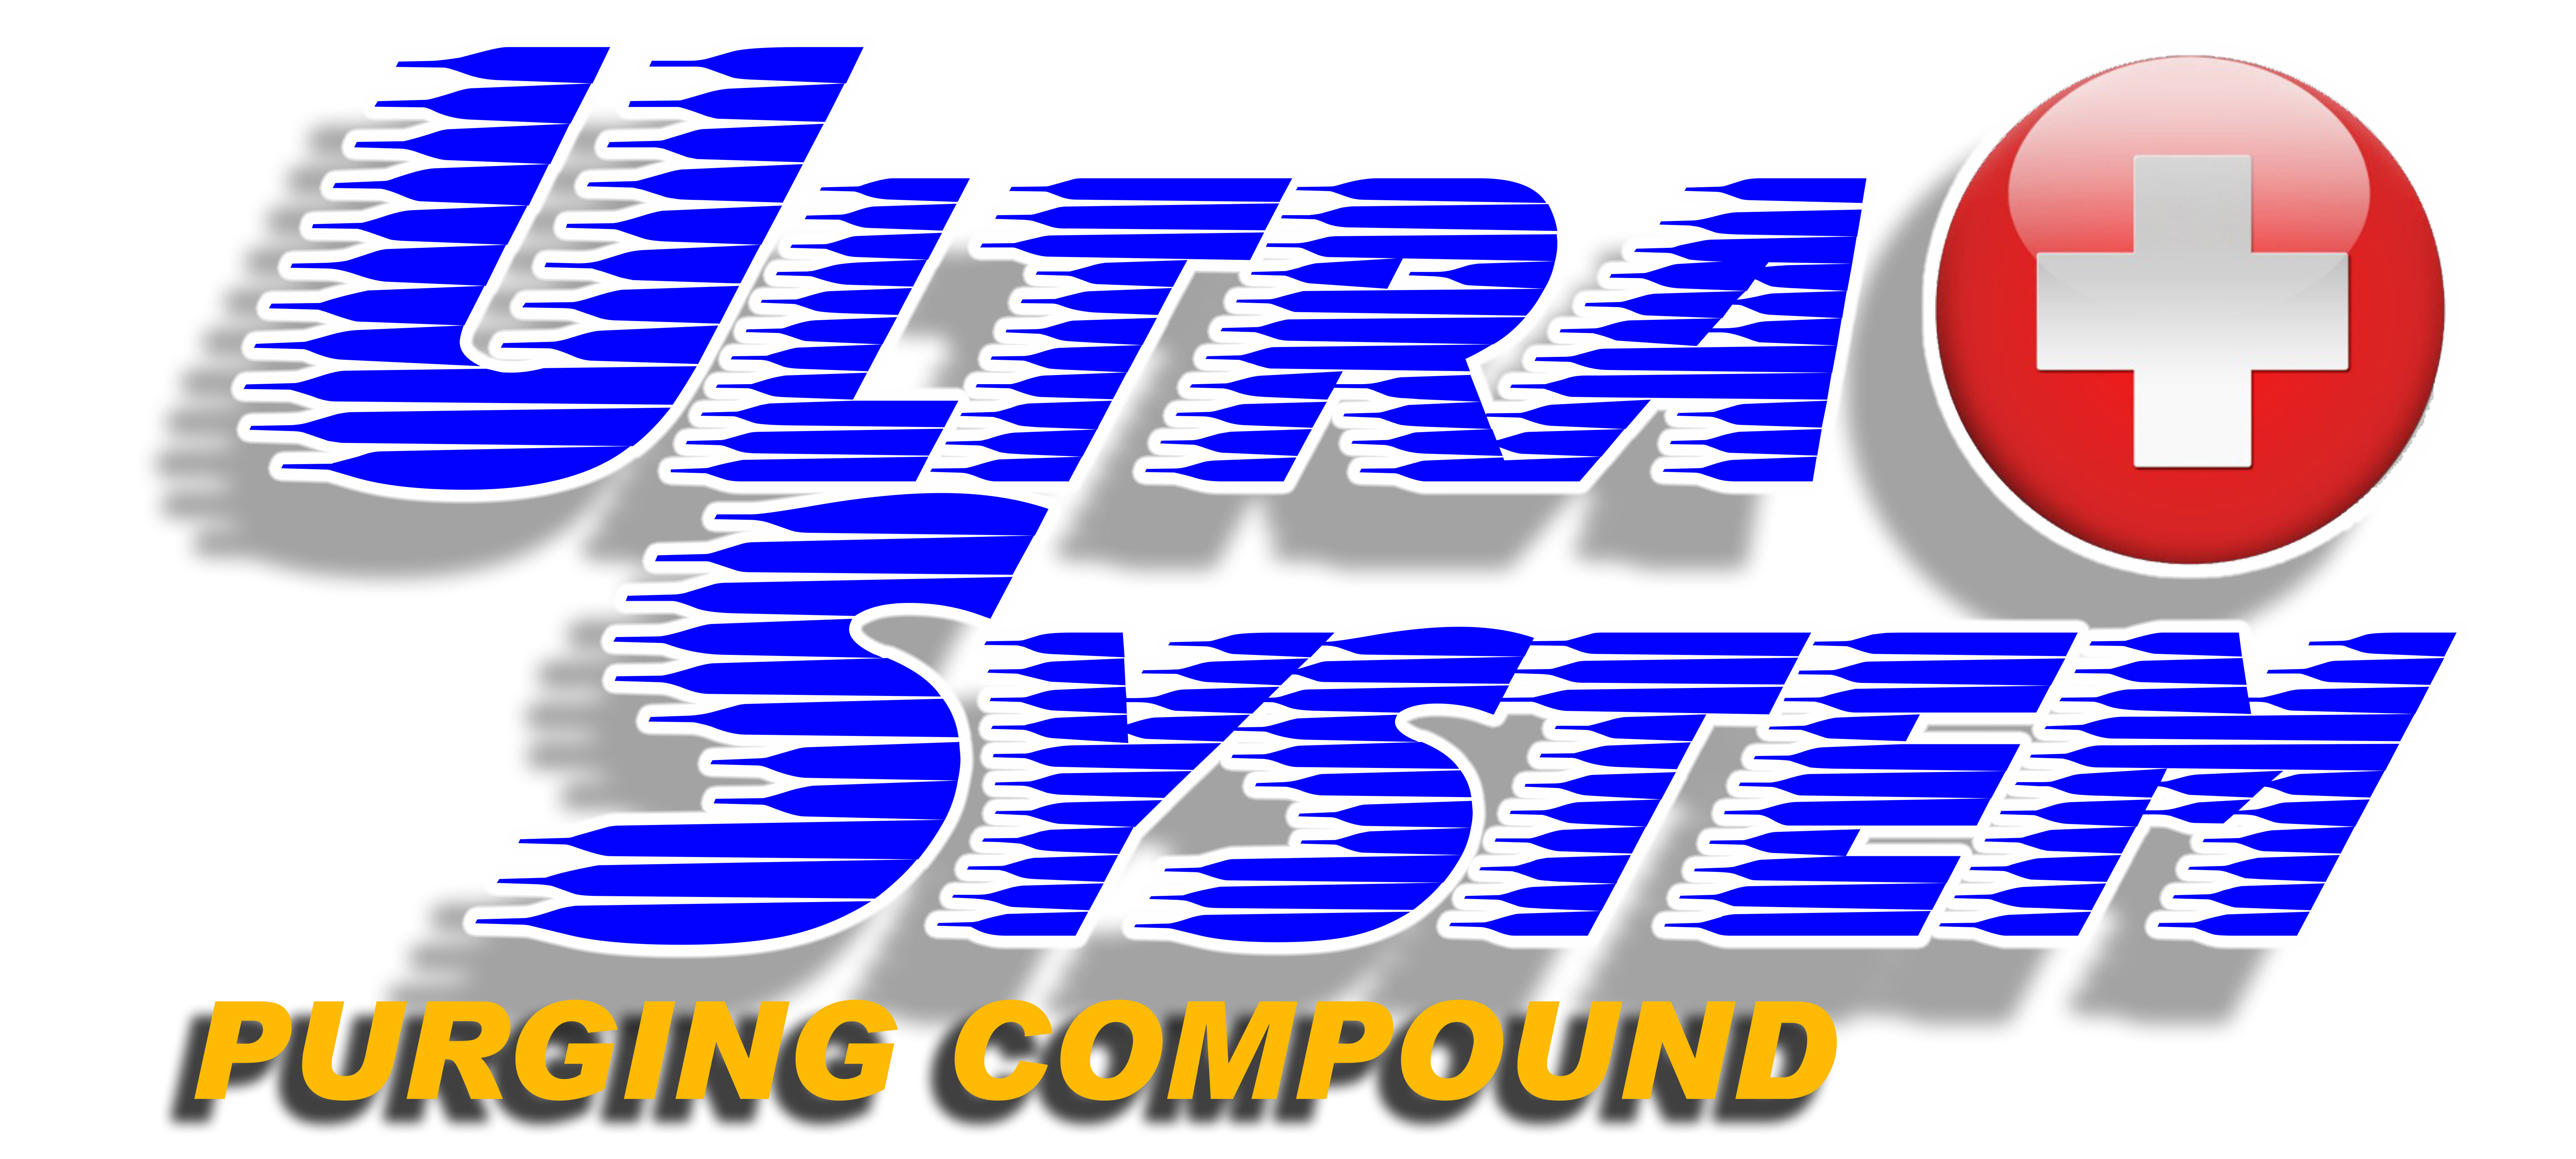 Ultra Systems